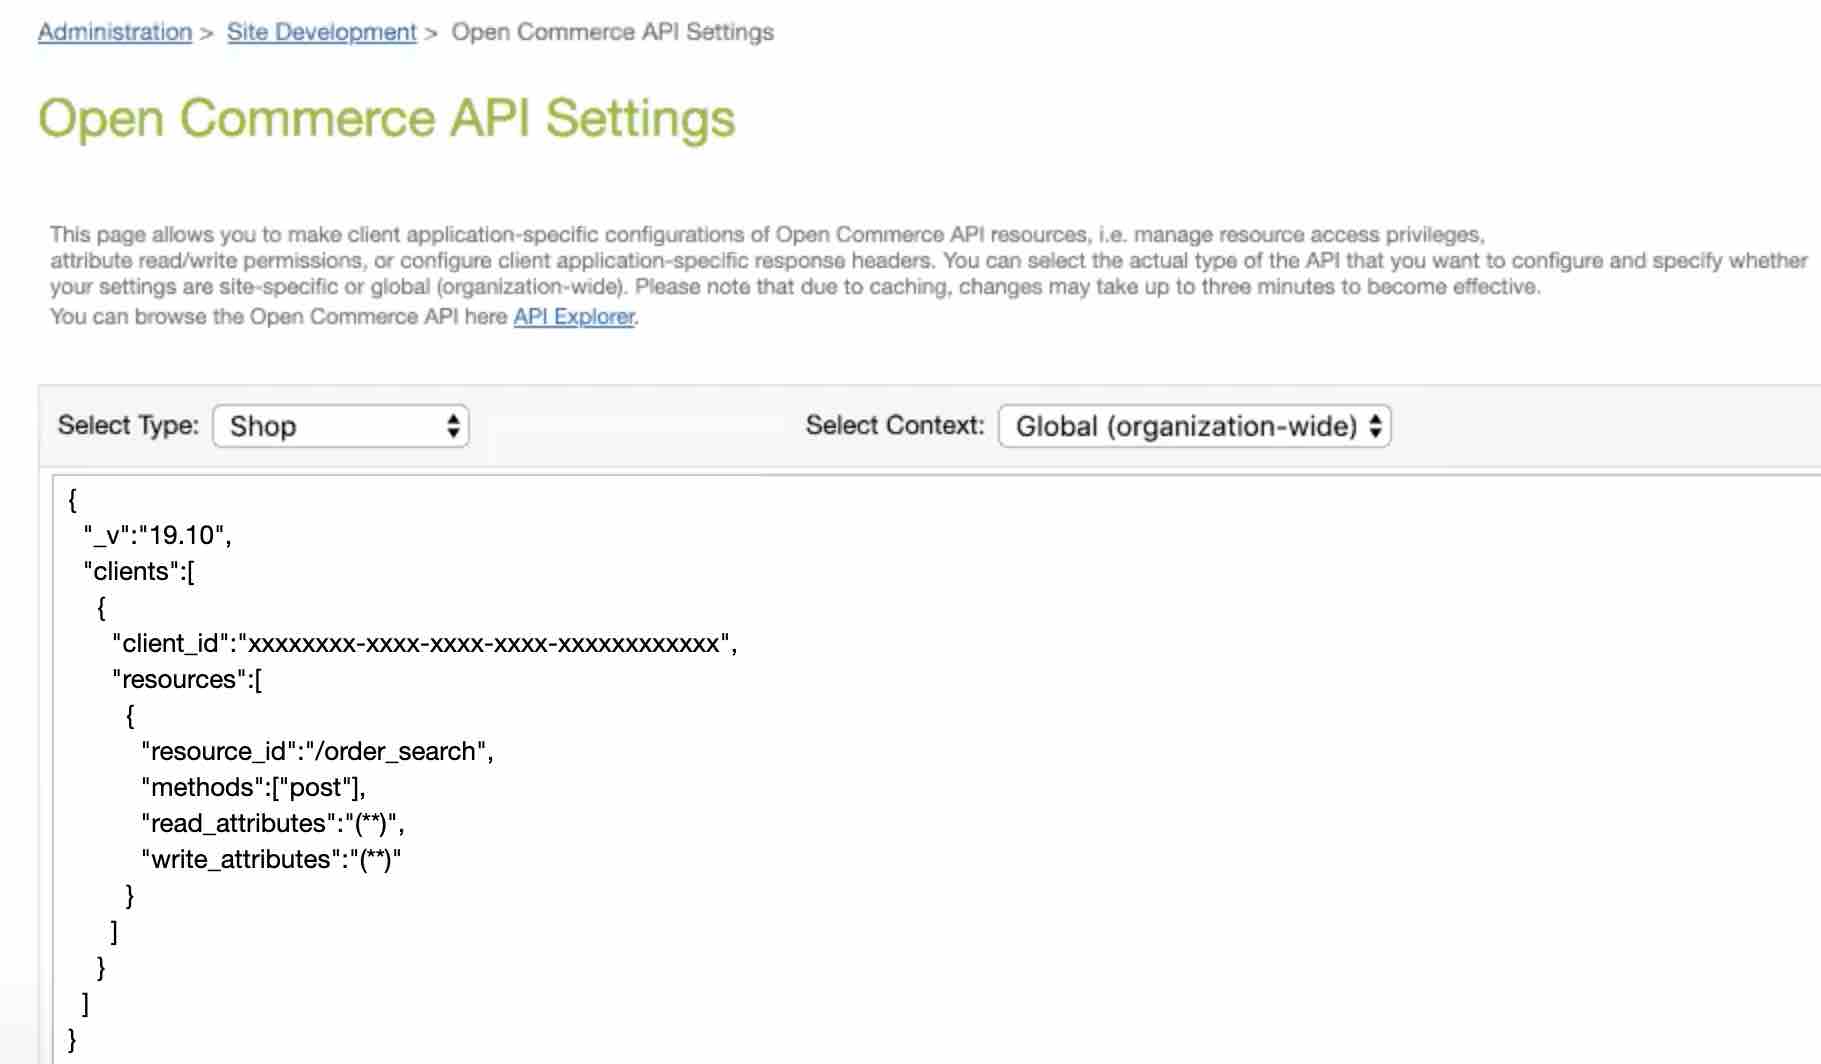 Open Commerce API Settings with Shop type selected